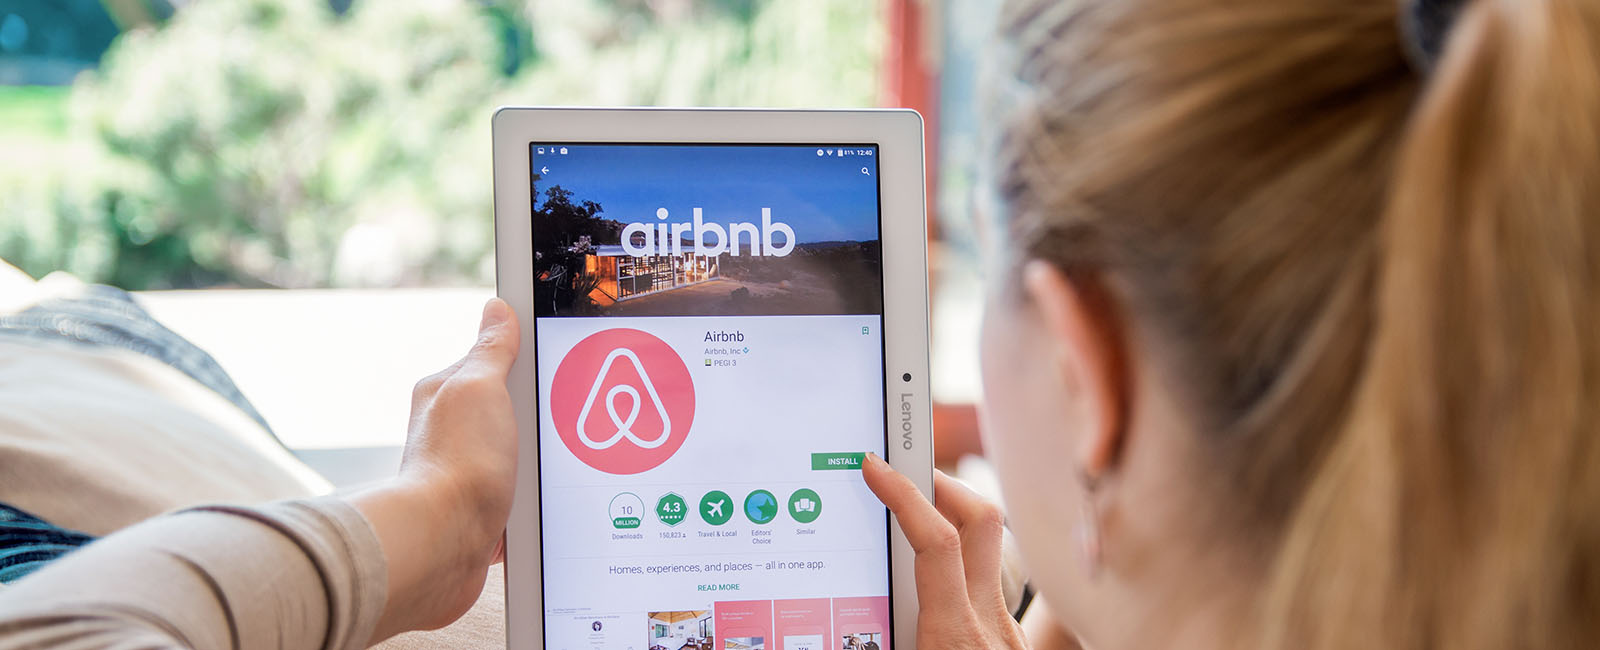 airbnb on a tablet